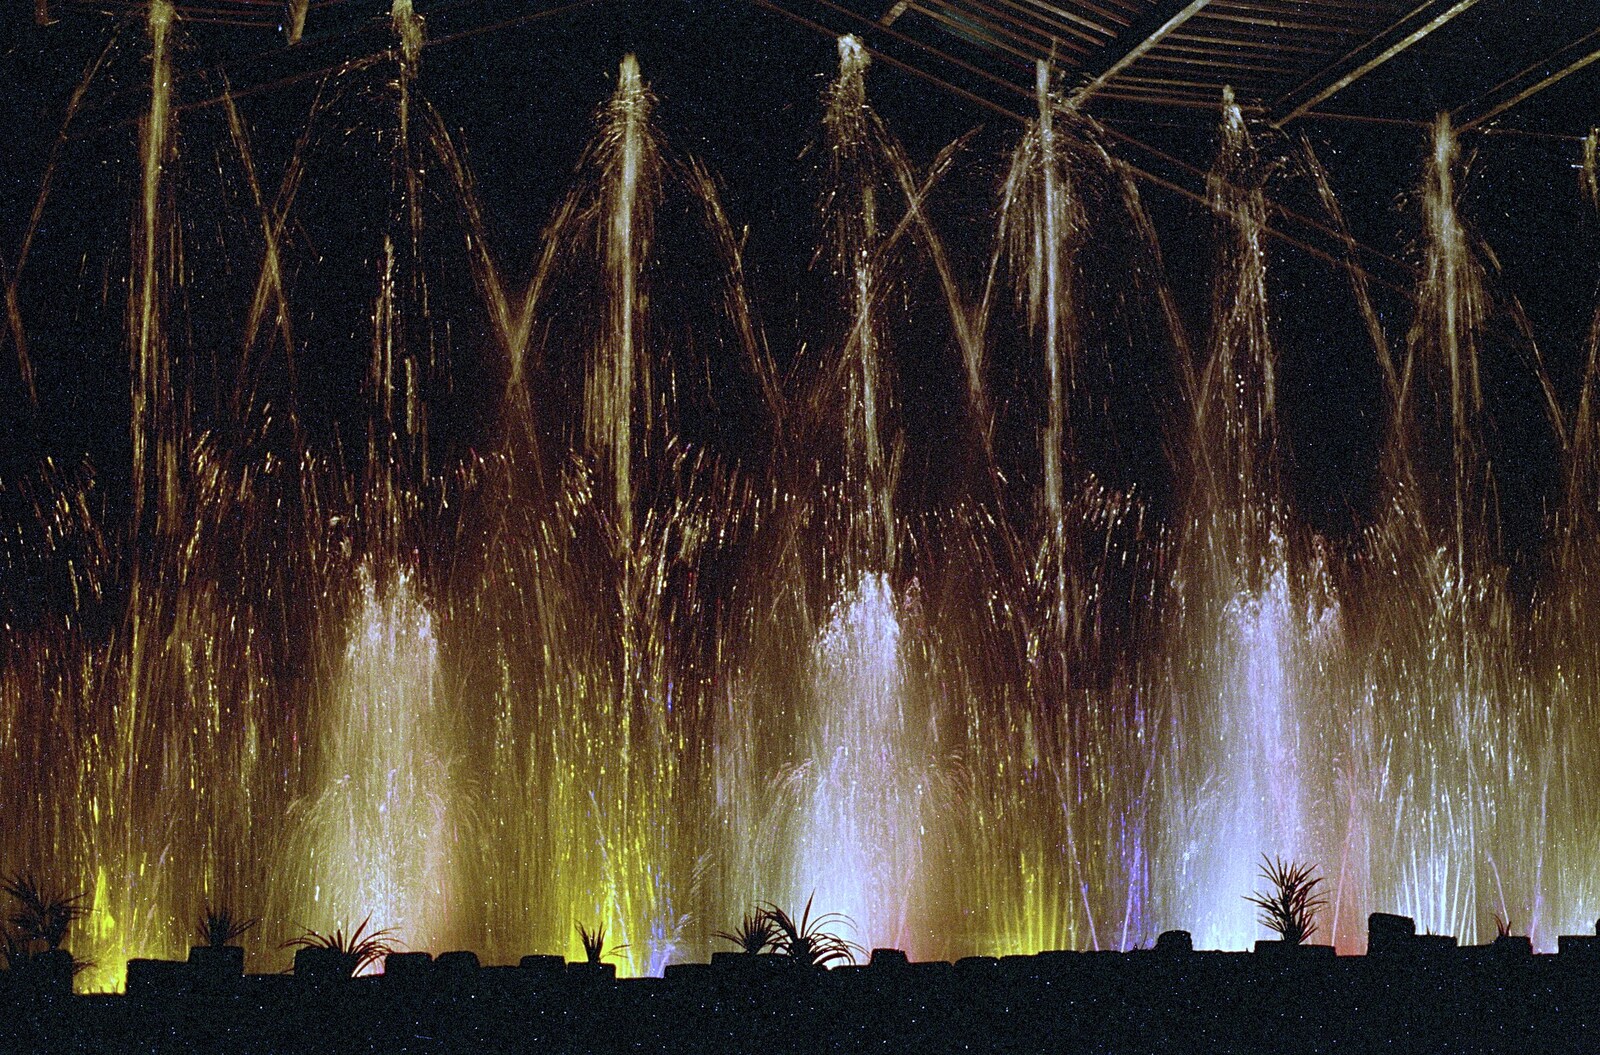 Dancing fountains from A Road-trip Through Rotorua to Palmerston, North Island, New Zealand - 27th November 1992